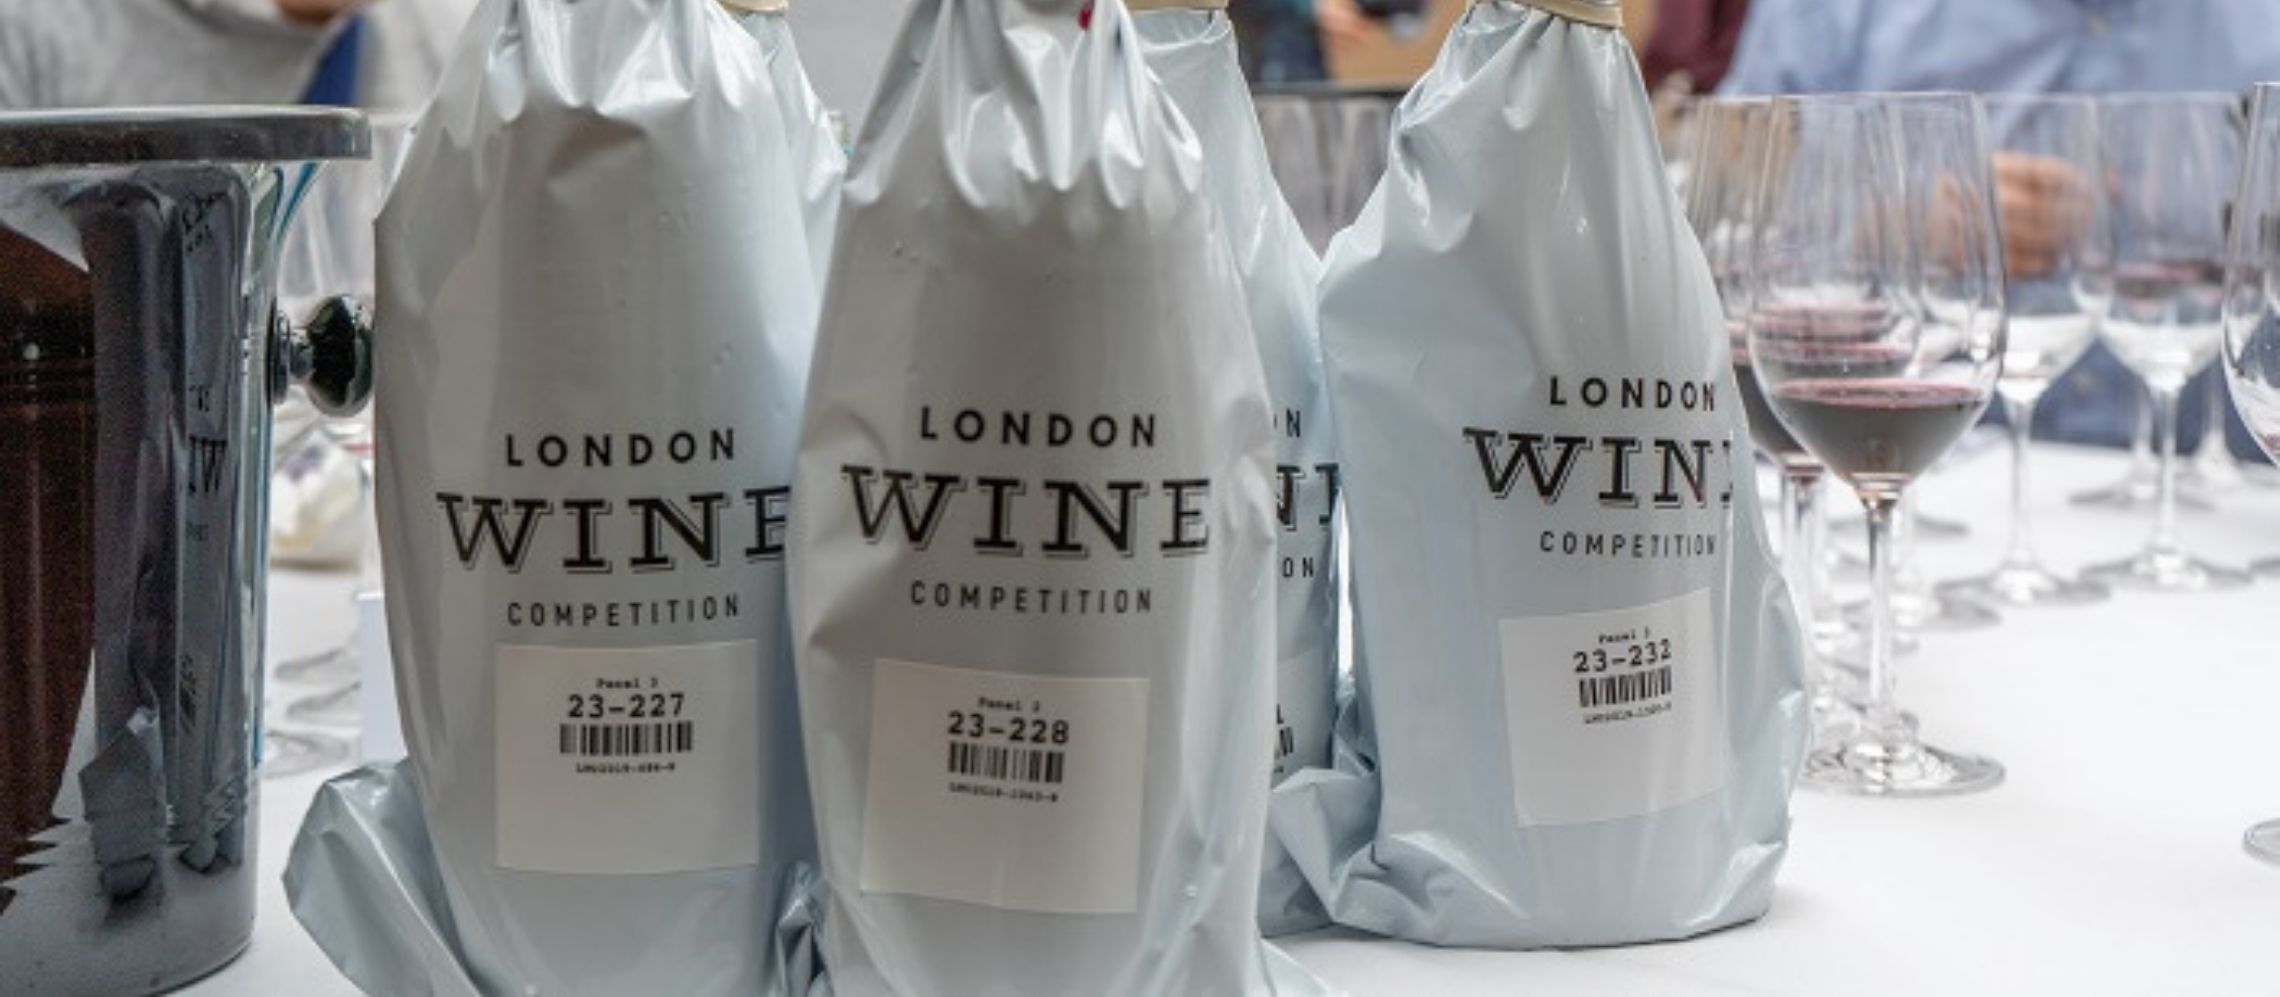 Photo for: What’s new for the 2021 London Wine Competition